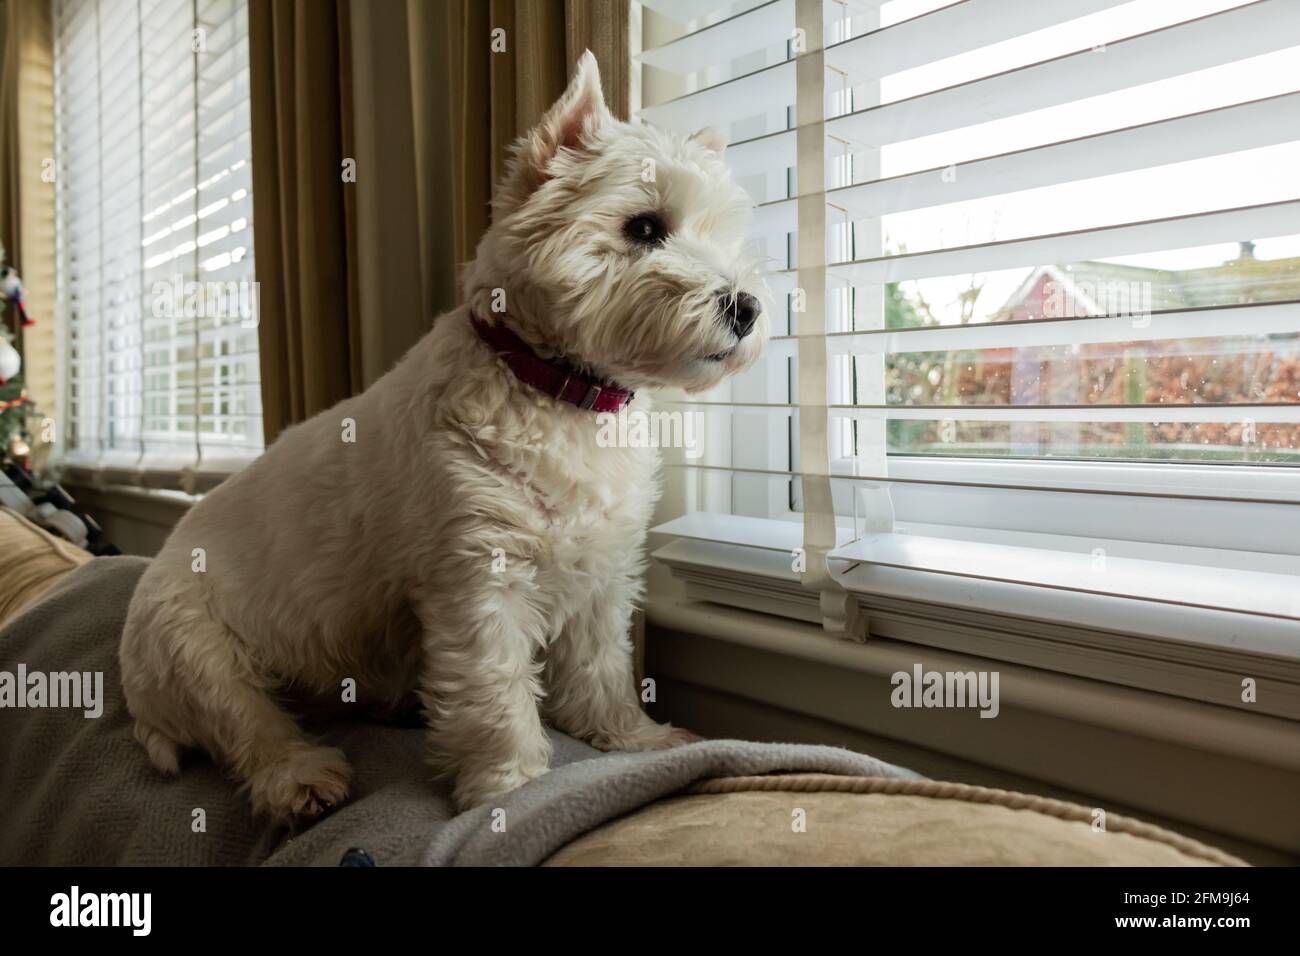 A cute white west highland terrier dog sitting on the top of a couch, looking out of a window Stock Photo